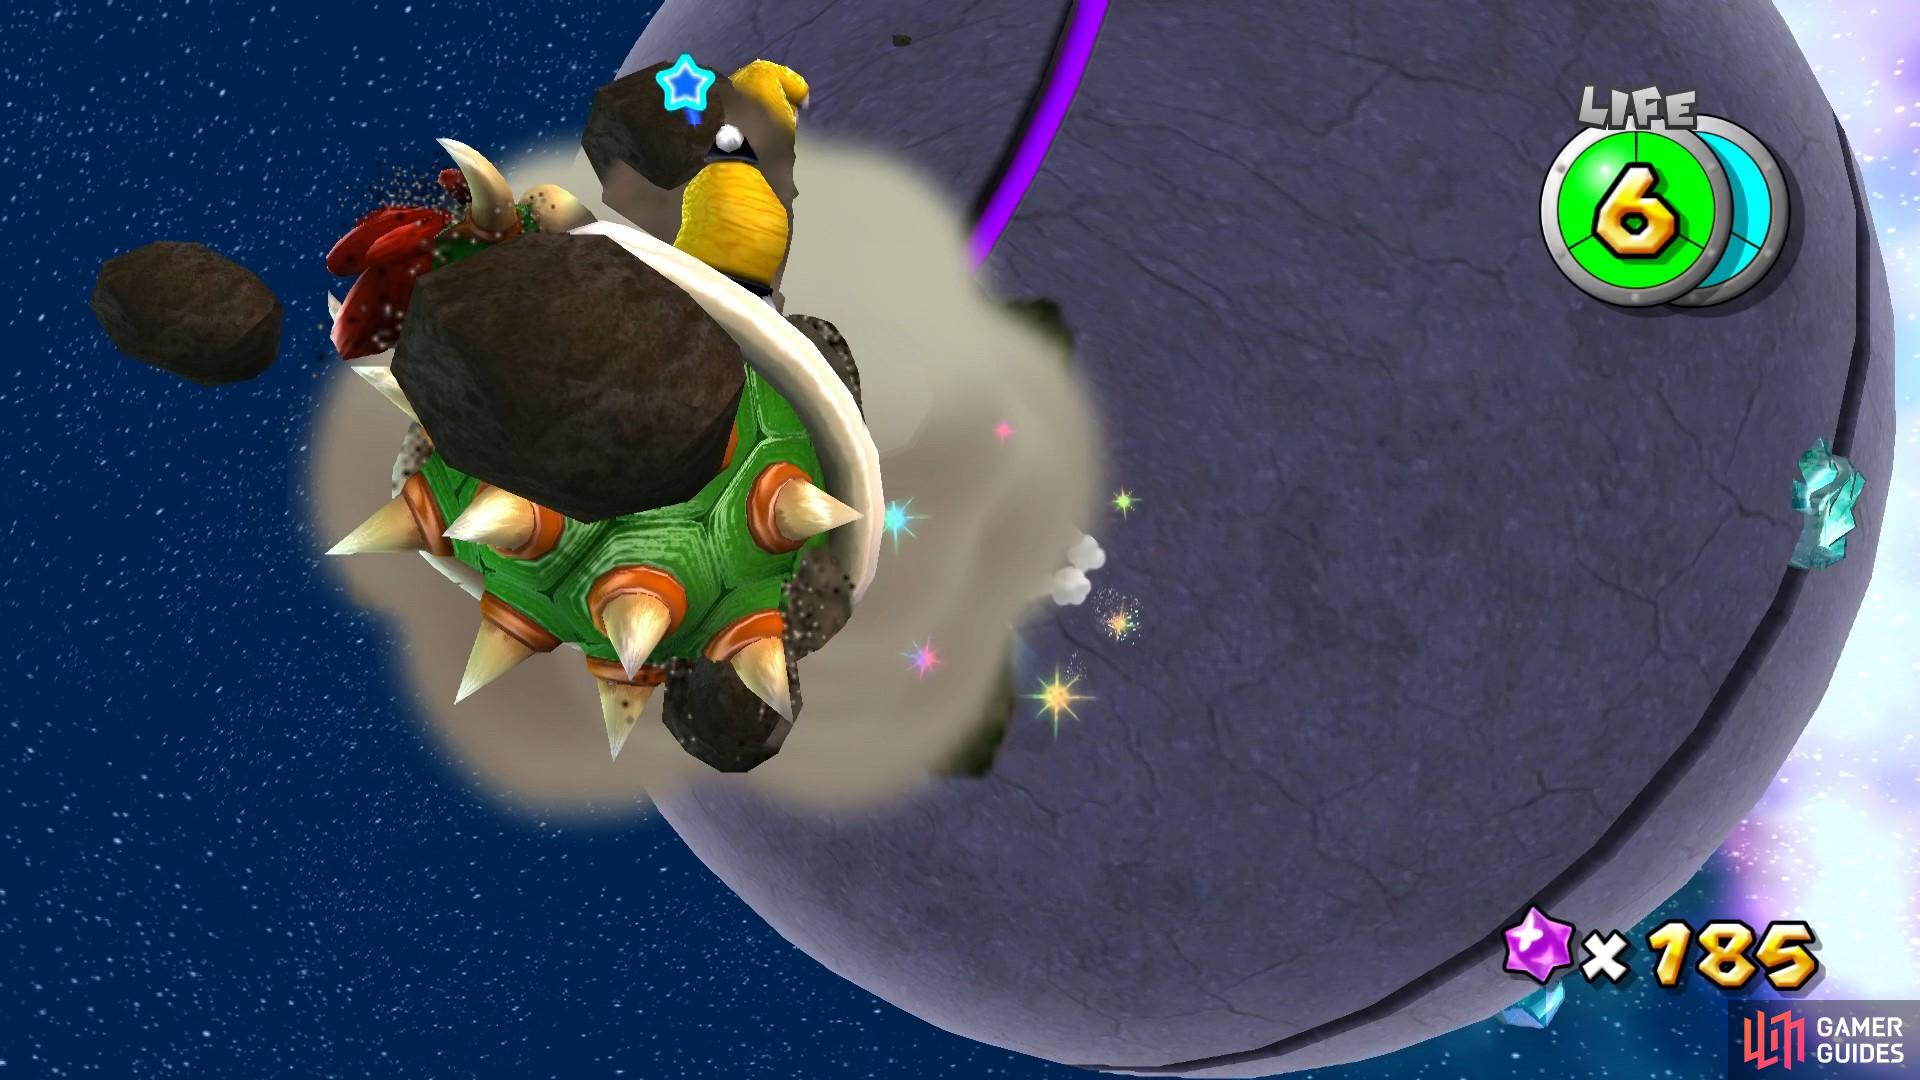 Smash Boulder Bowser by spin attacking his exposed face.